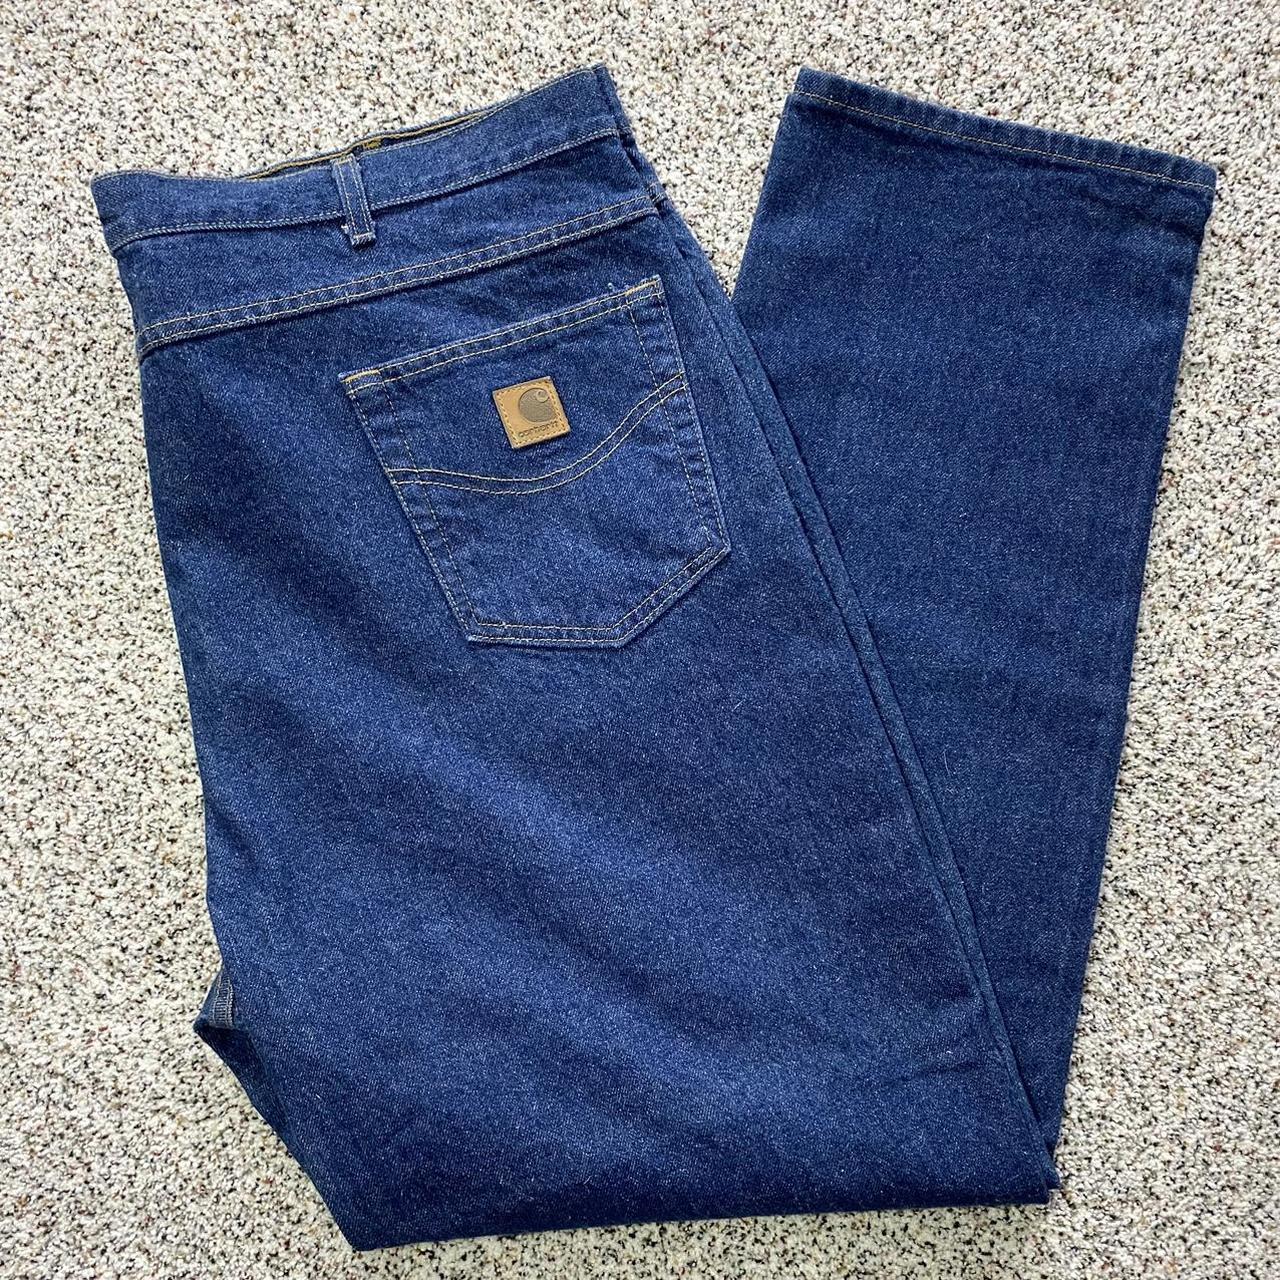 Awesome Vintage Carhartt Pants Like New! Excellent... - Depop